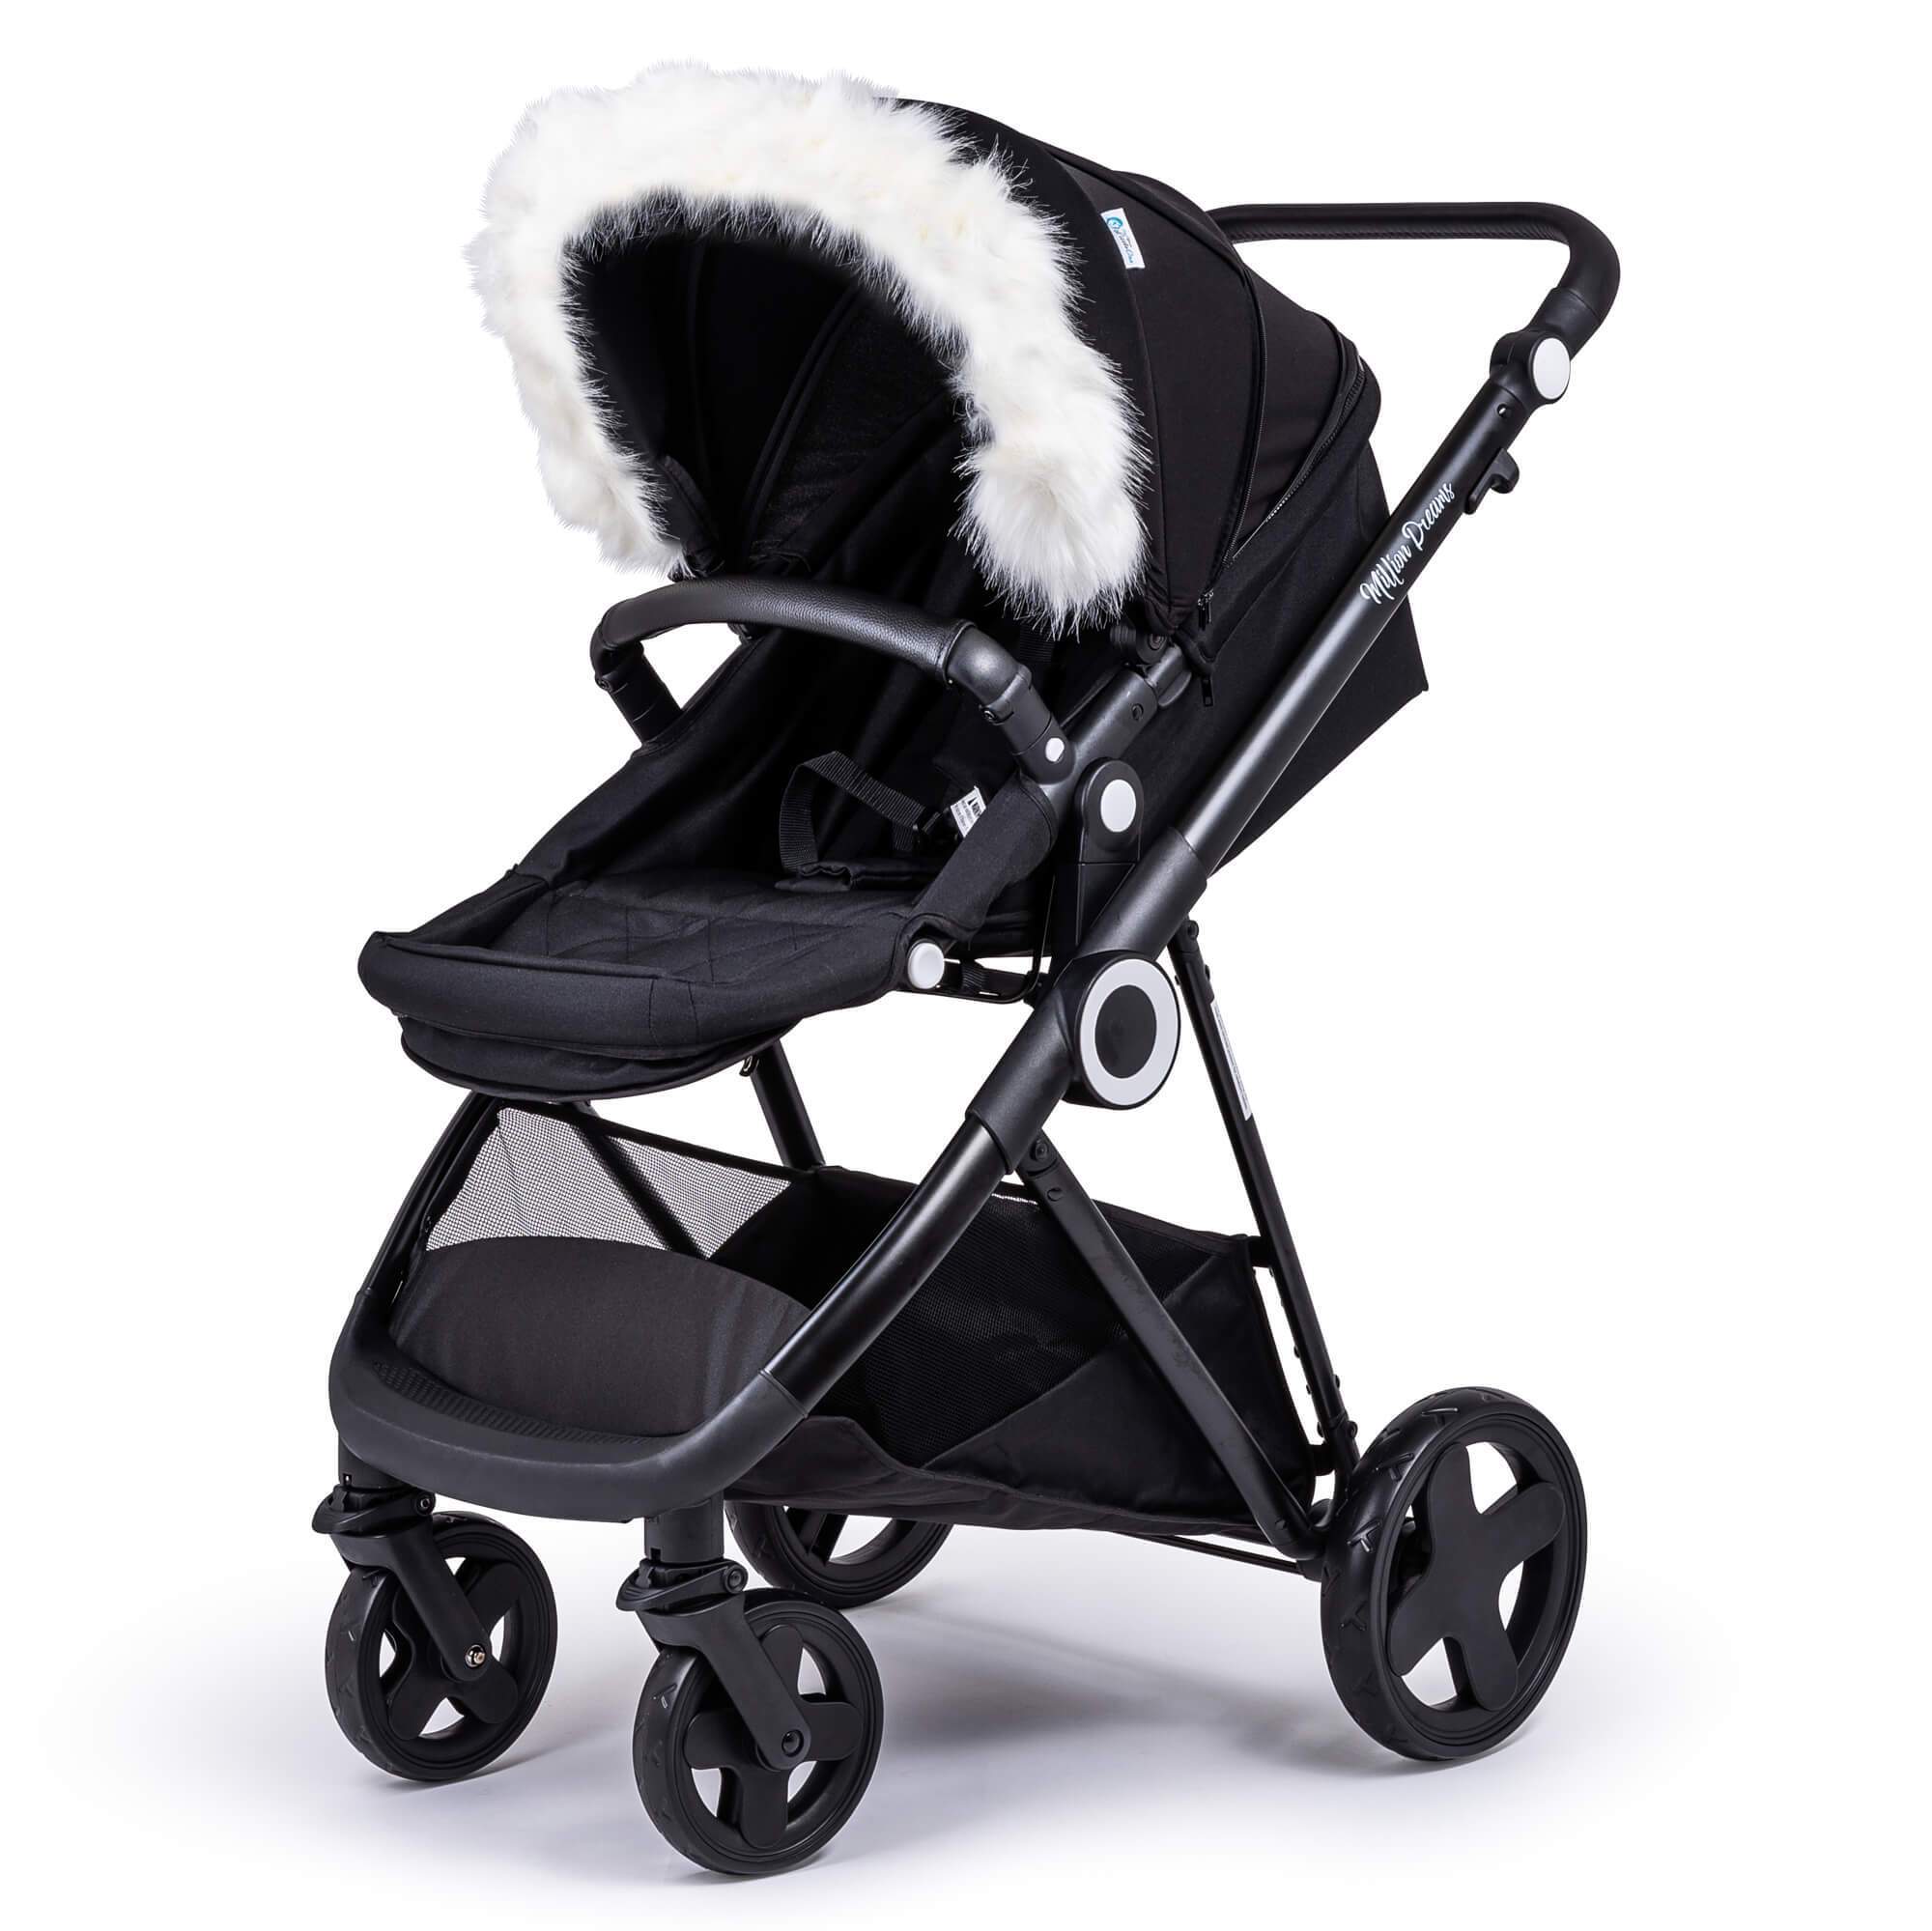 Pram Fur Hood Trim Attachment for Pushchair Compatible with Inglesina - White / Fits All Models | For Your Little One